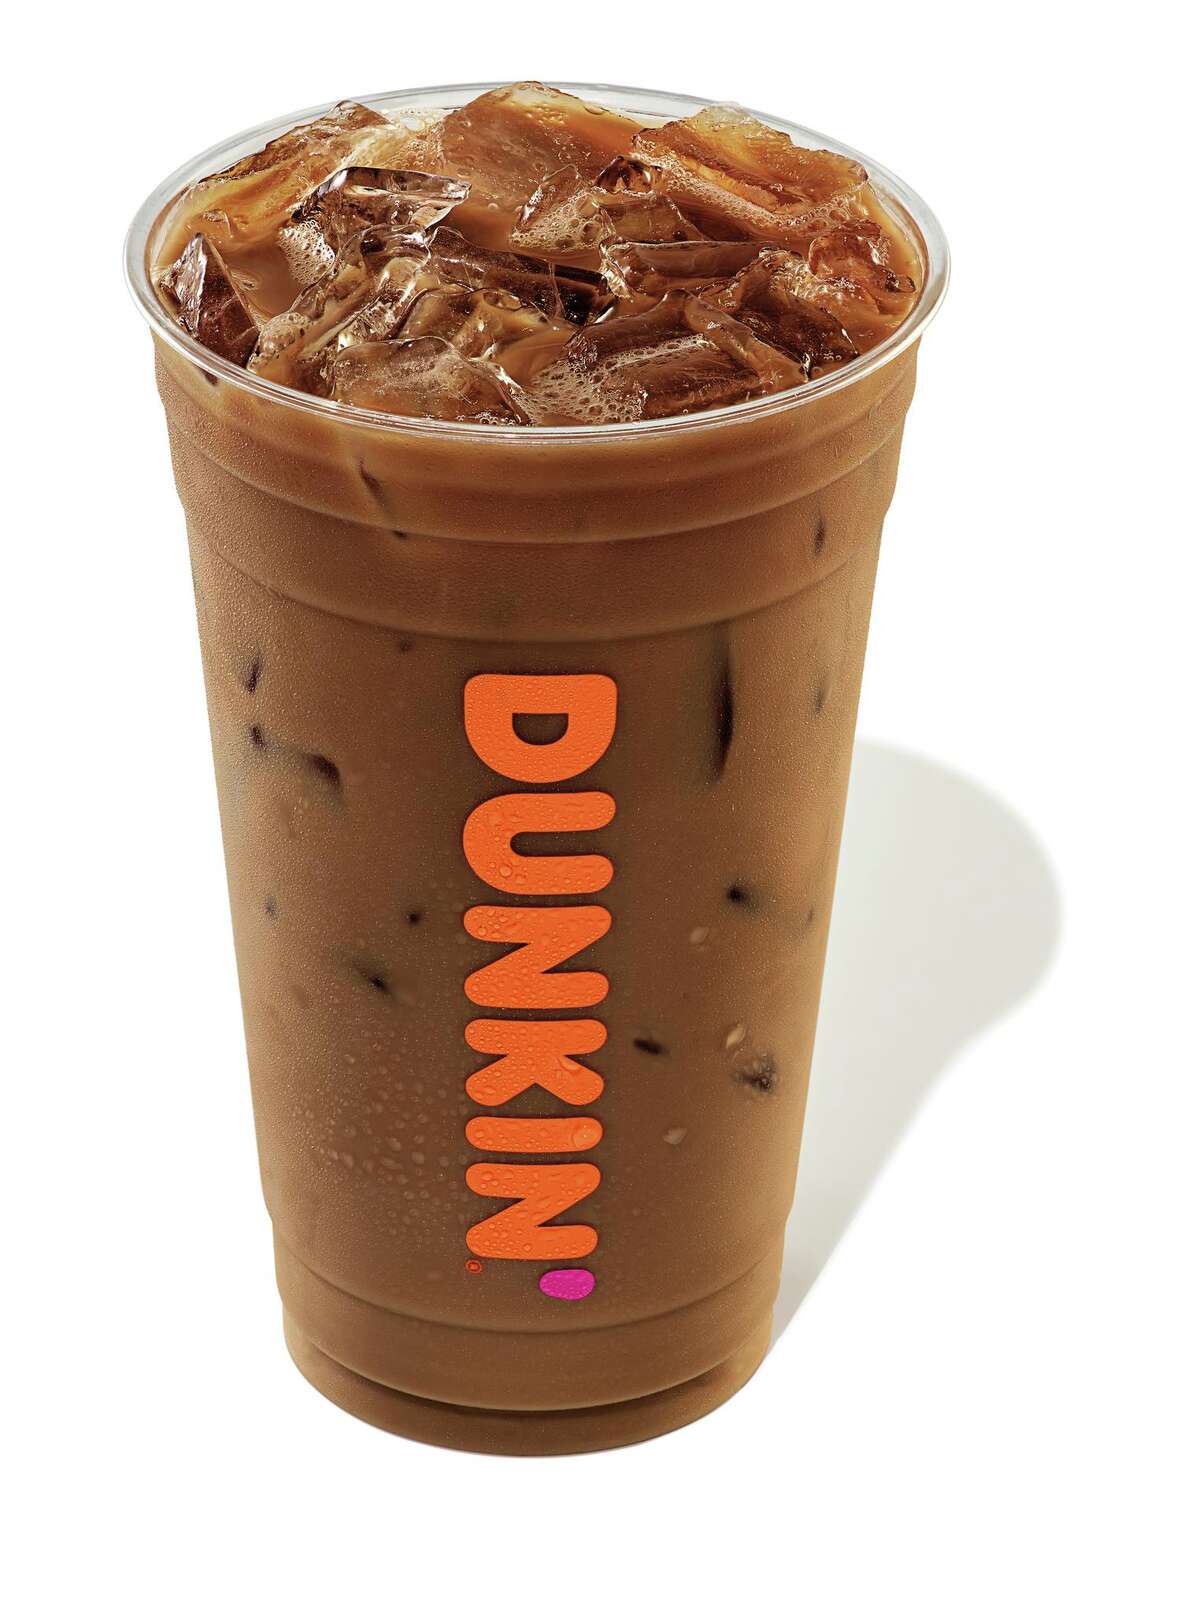 Dunkin’ Donuts offers two-for-$5 medium iced coffees